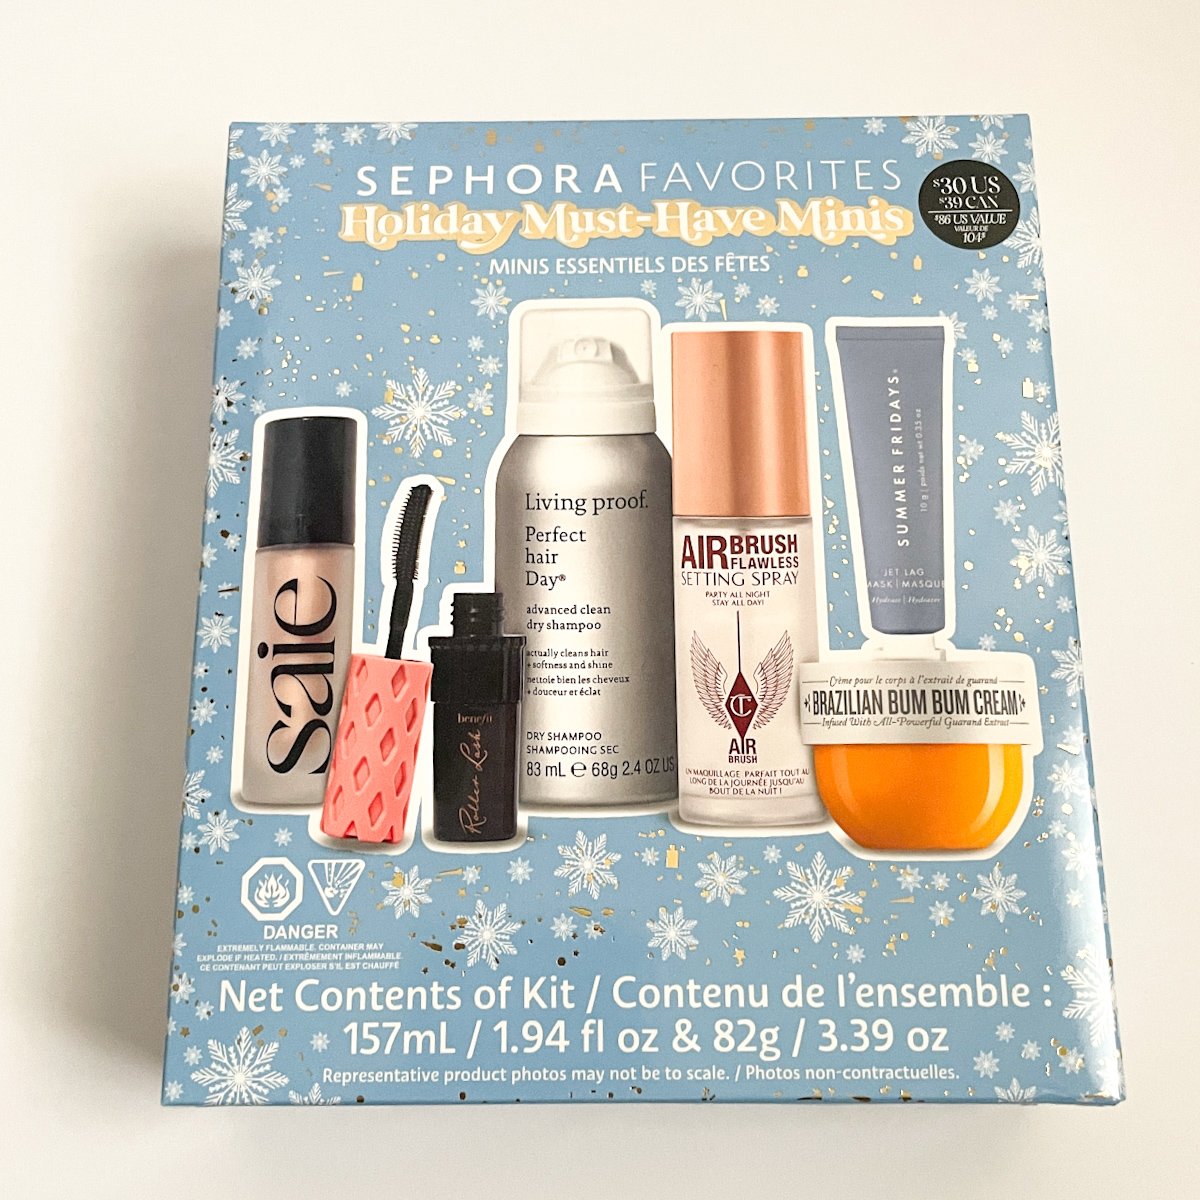 Sephora Favorites Mini Holiday Must Haves Set Review MSA